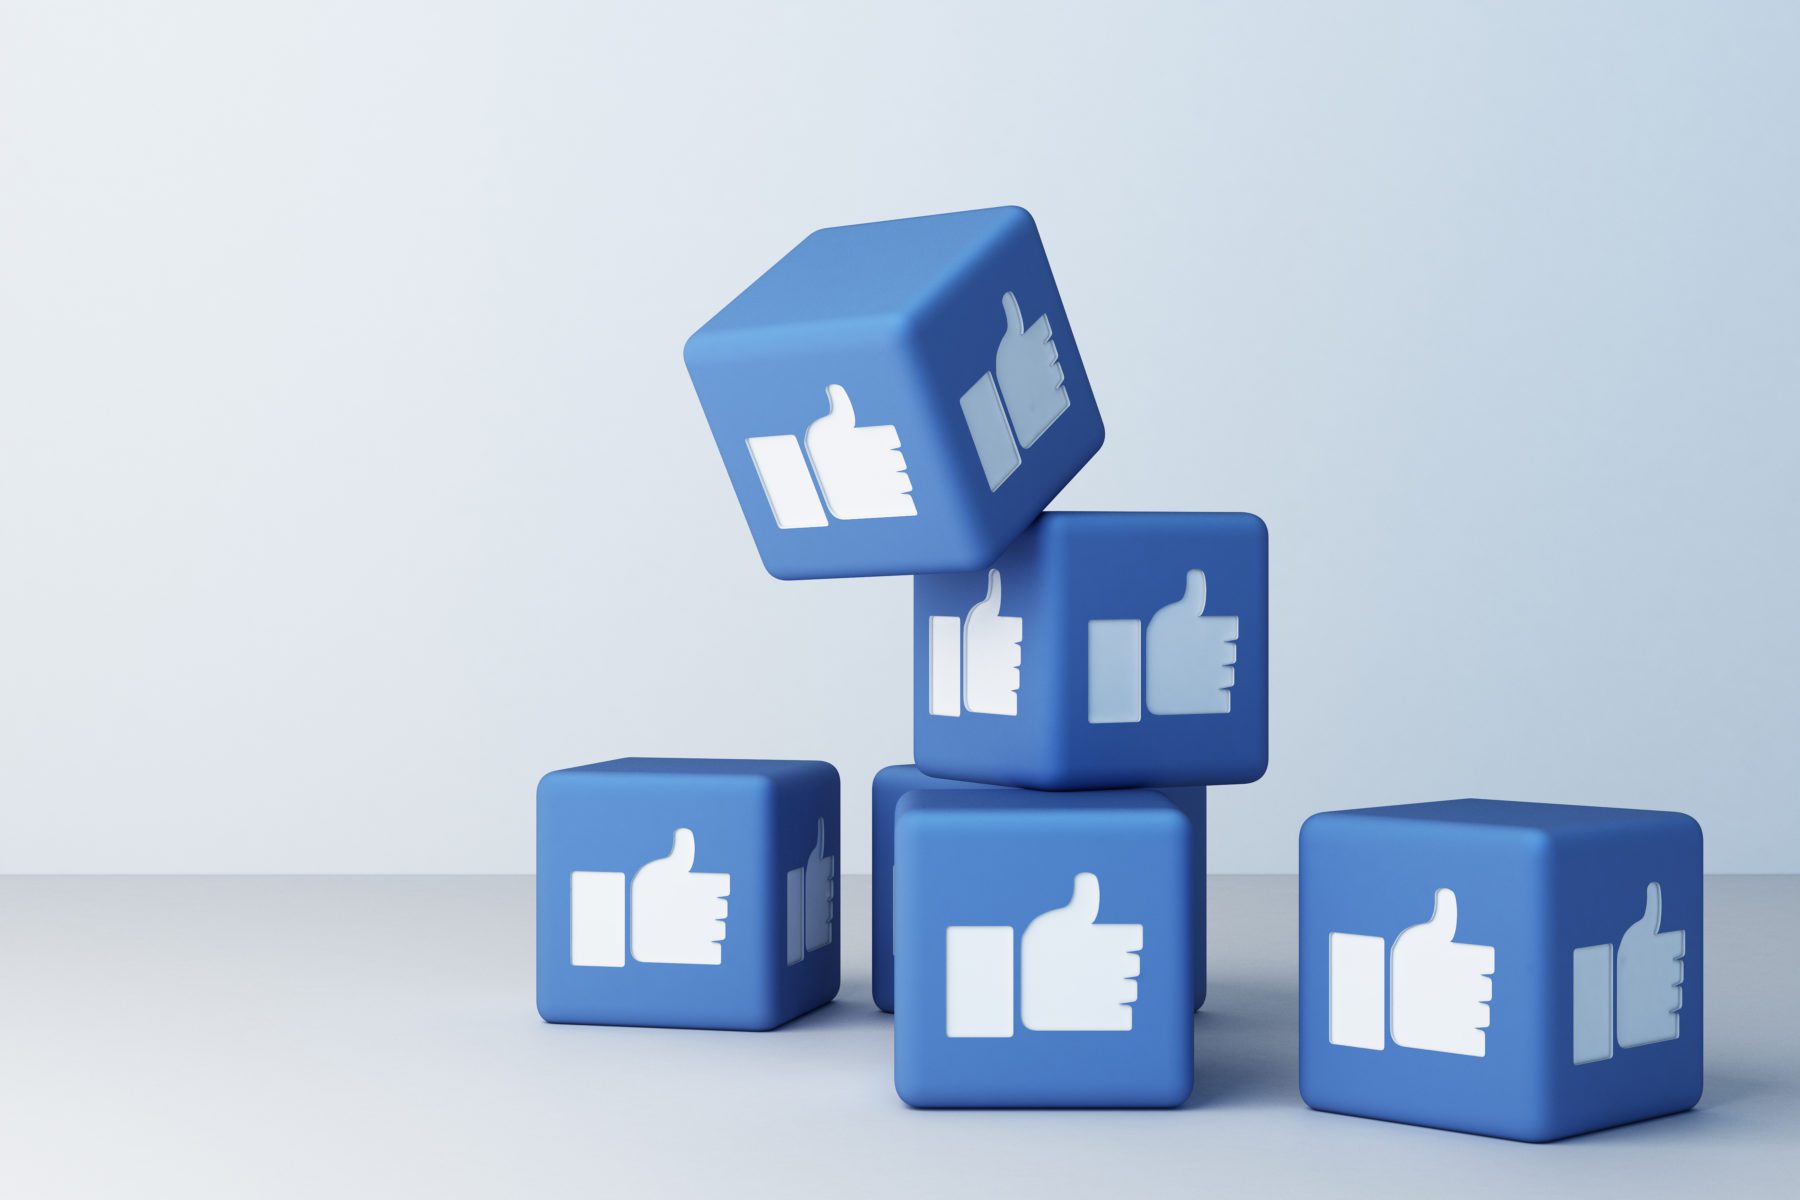 Tips for Using Facebook for Business